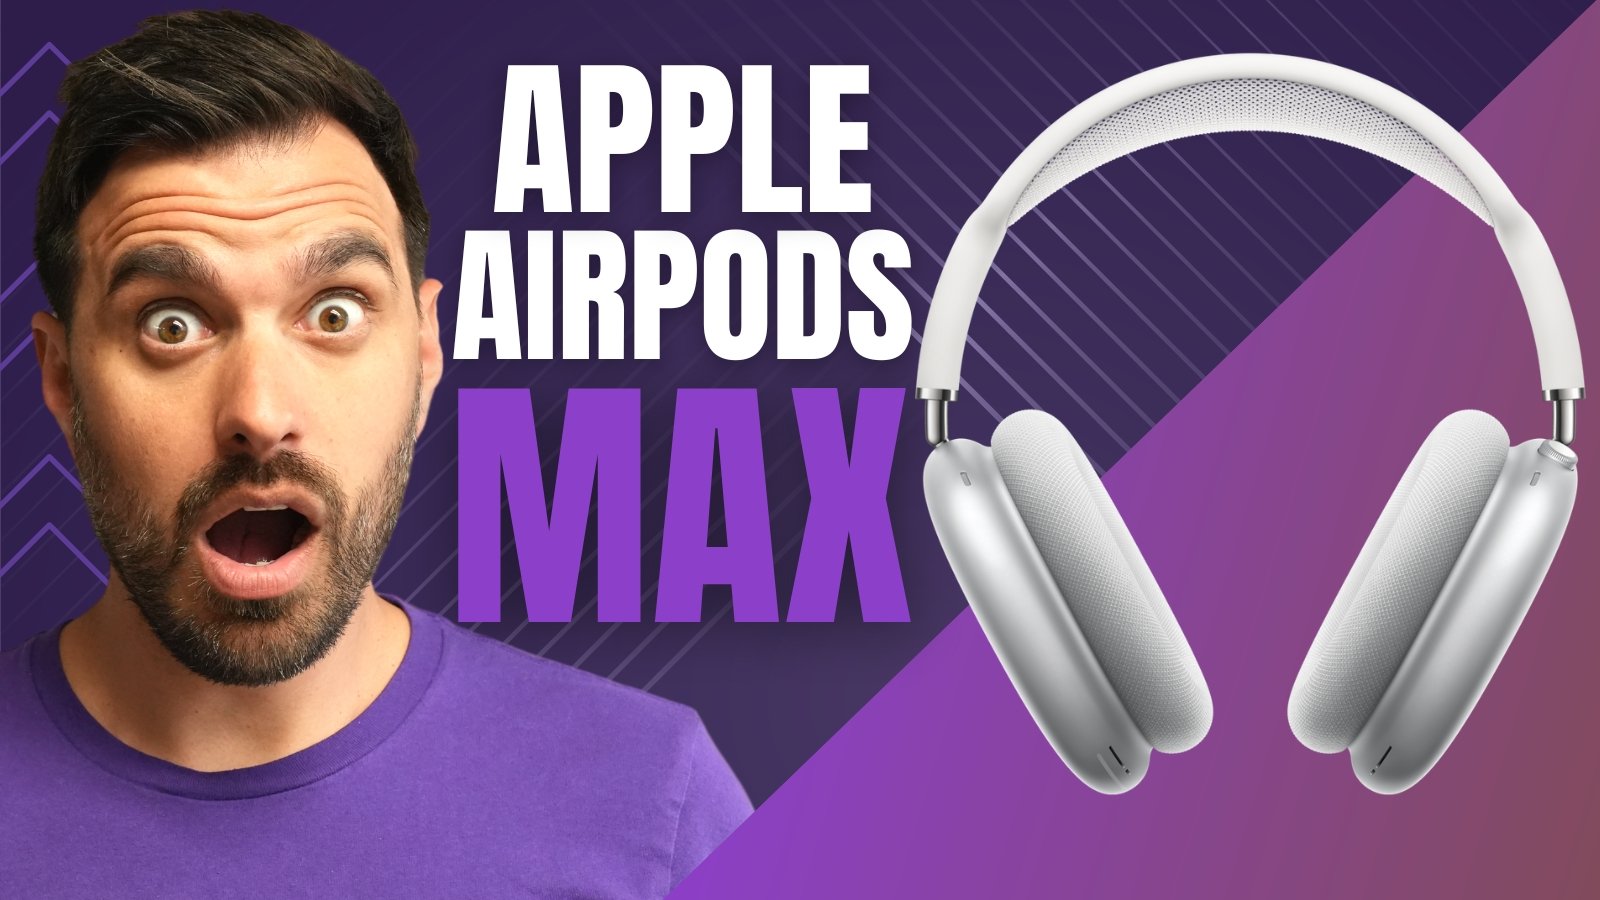 Don't expect Apple's AirPods Max 2 headphones to launch in 2023